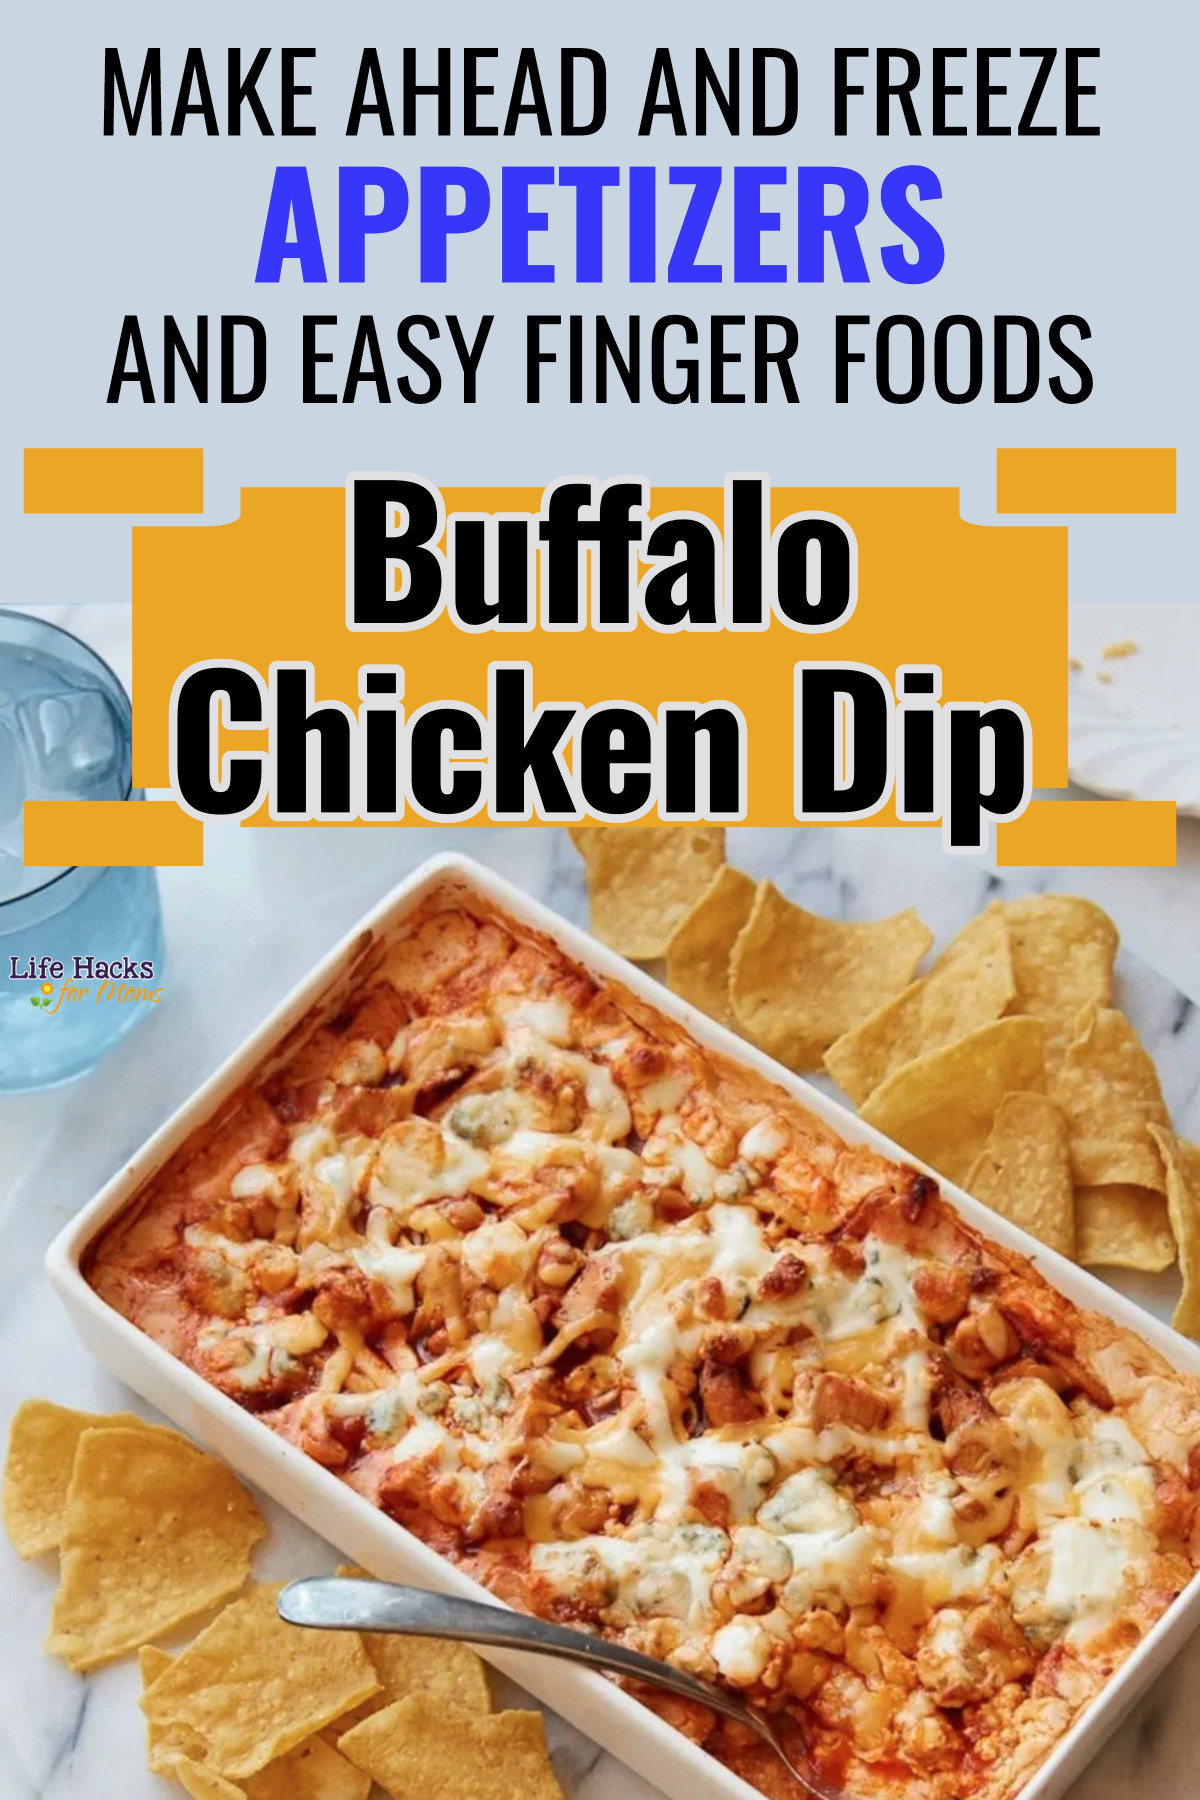 Make Ahead And Freeze Appetizers - Buffalo Chicken Dip